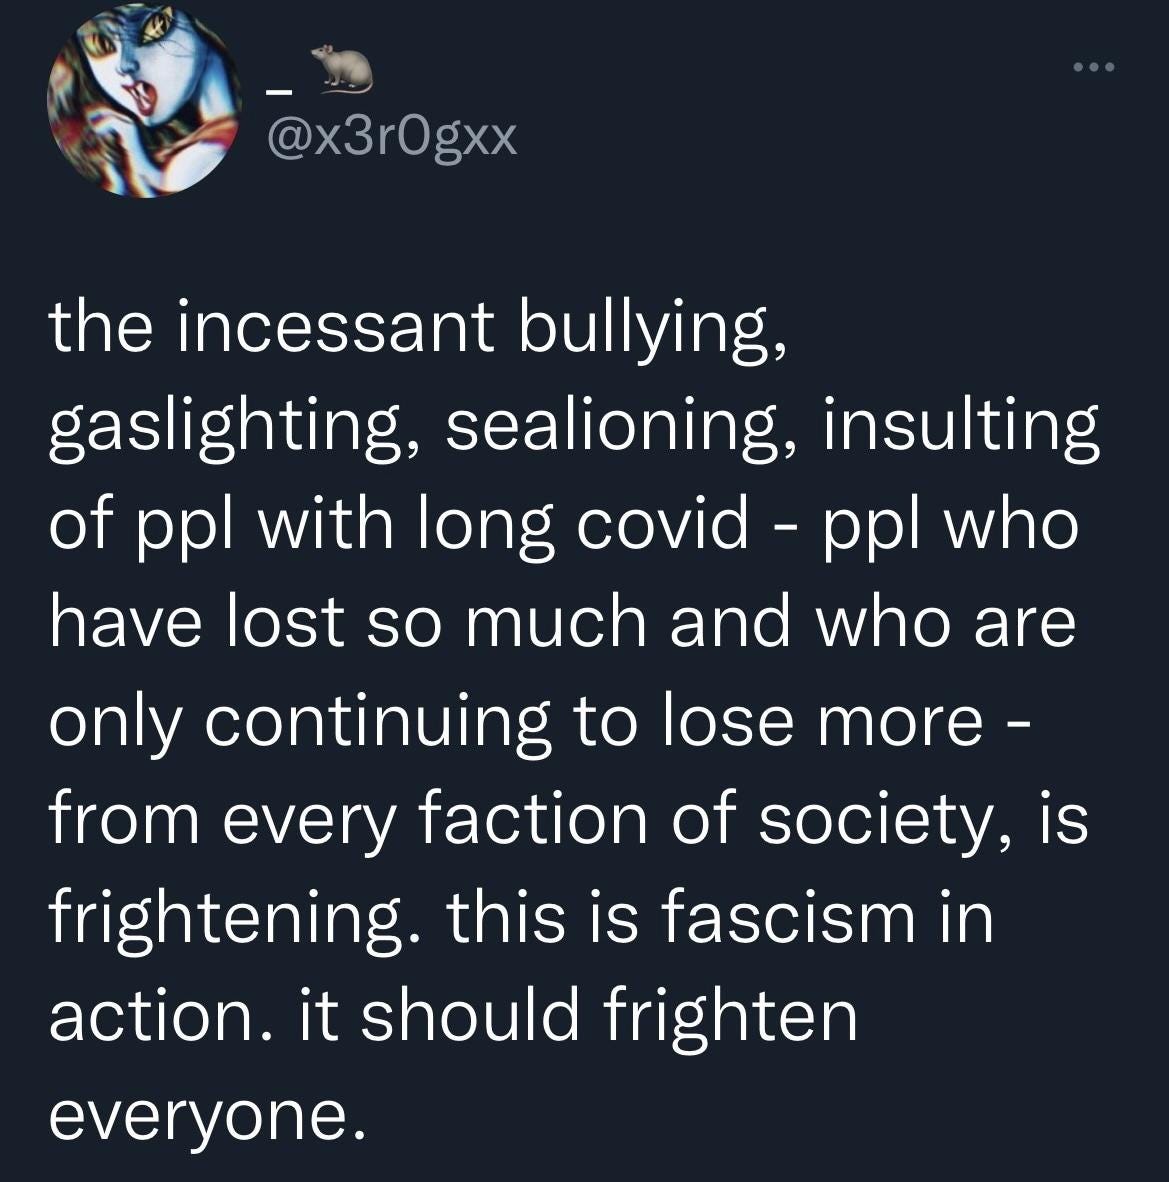  tweet from @x3r0gxx: “the incessant bullying, gaslighting, sealioning, insulting of ppl with long covid - ppl who have lost so much and who are only continuing to lose more - from every faction of society, is frightening. this is fascism in action. it should frighten everyone.”